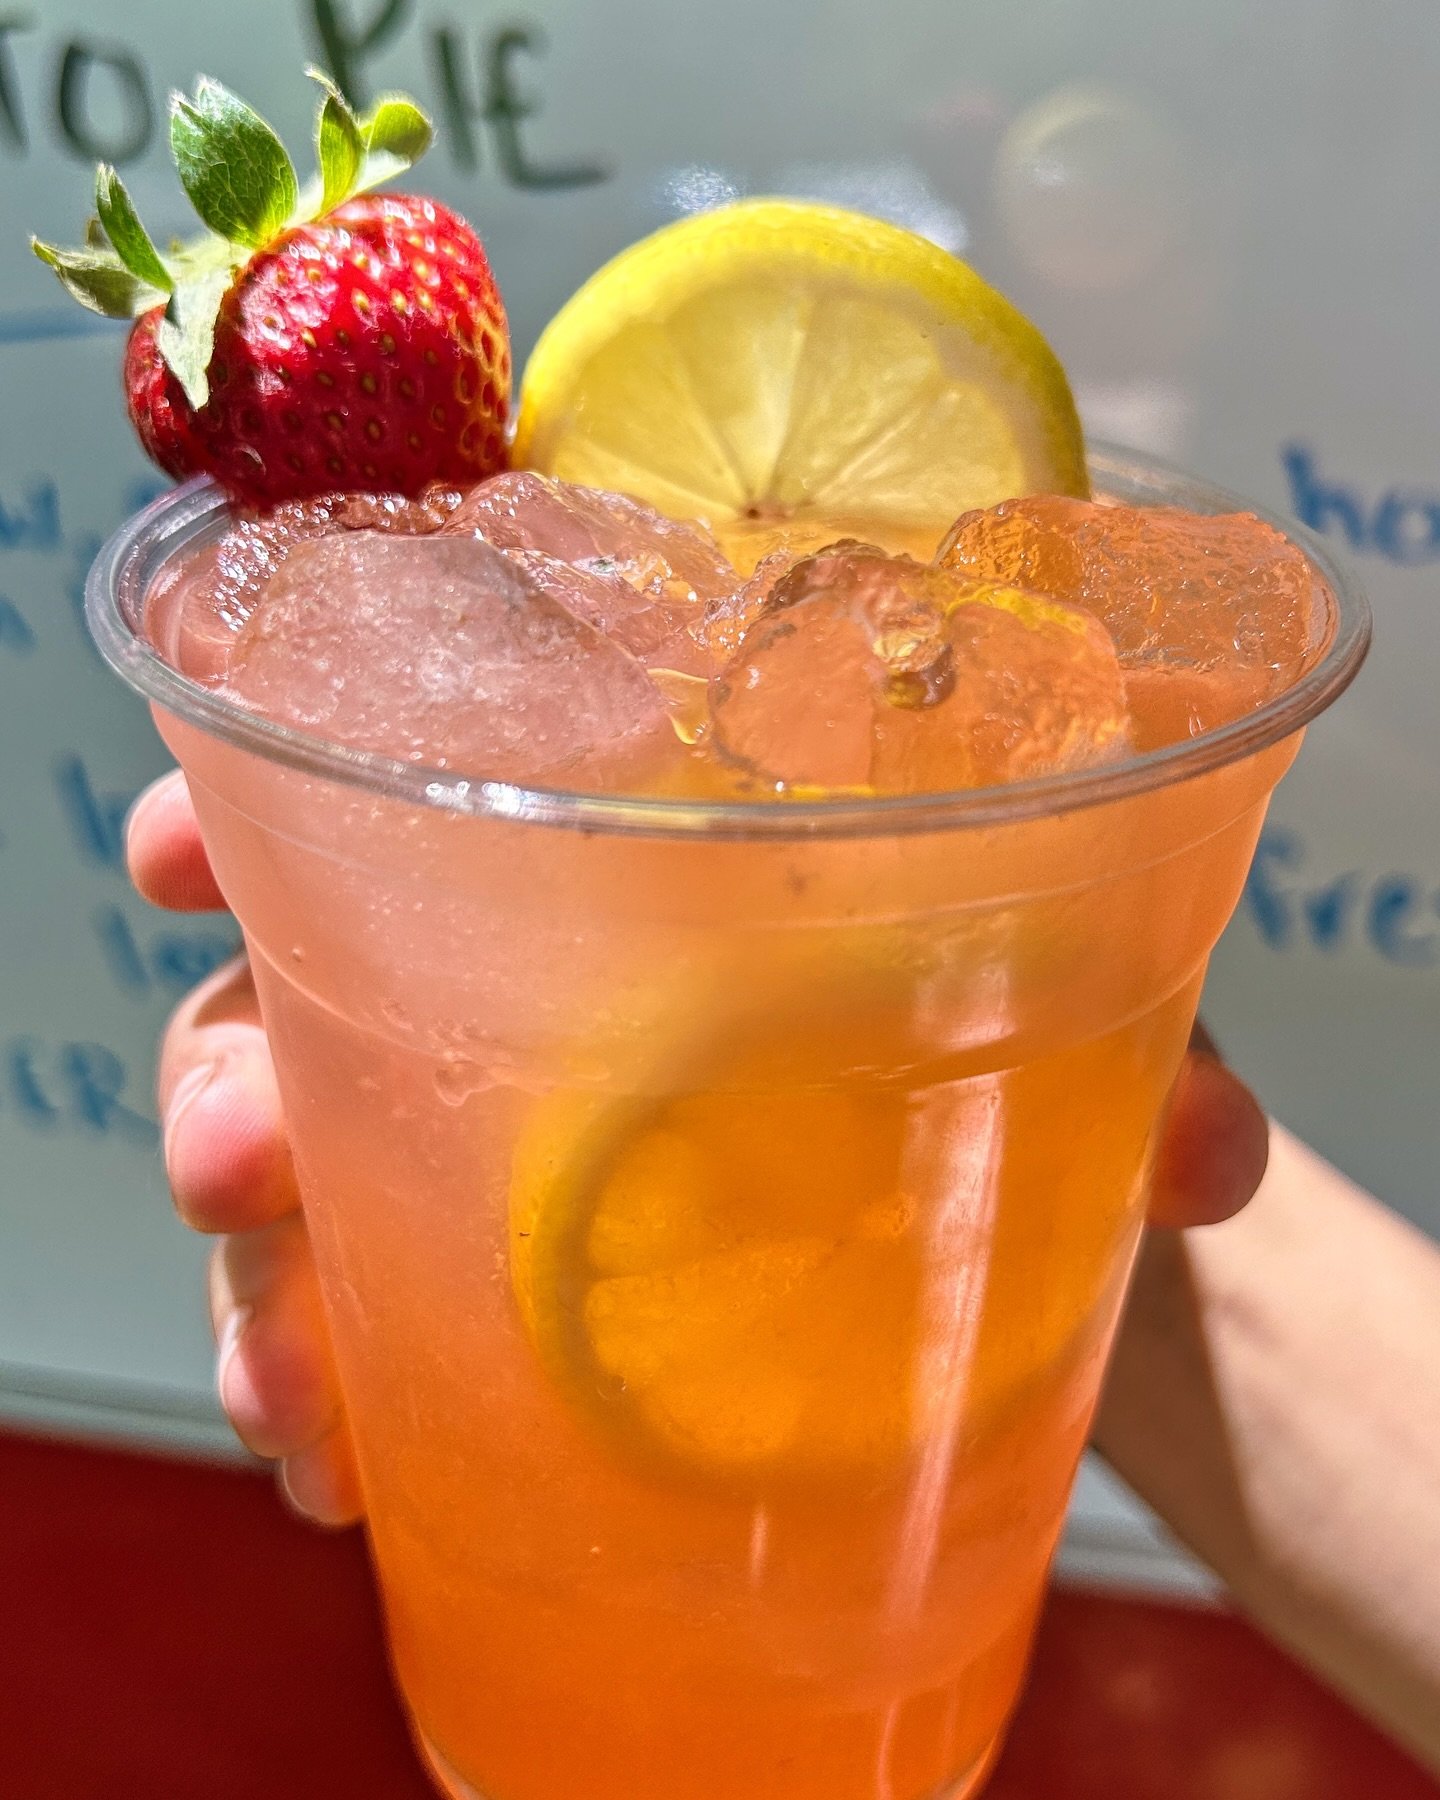 🍓 🍋 Come see us this weekend in Ponca for a refreshing strawberry lemonade 🍋 🍓 
We make our strawberry syrup with ripe, juicy strawberries. It truly tastes like childhood in a cup!

#buffalonationalriver